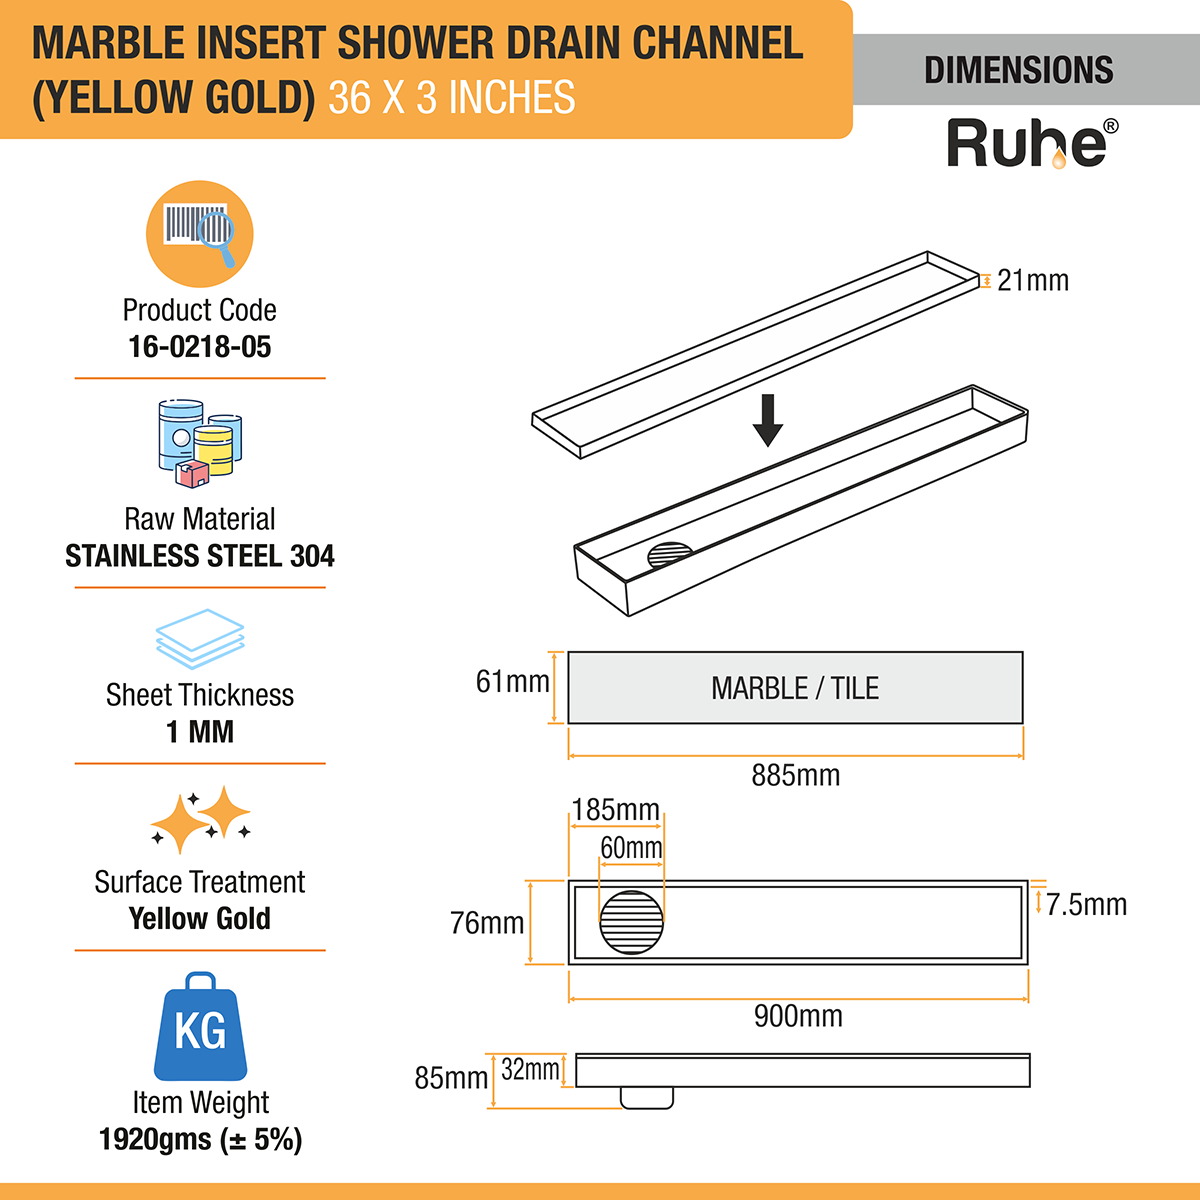 Marble Insert Shower Drain Channel (36 x 3 Inches) YELLOW GOLD PVD Coated dimensions and sizes